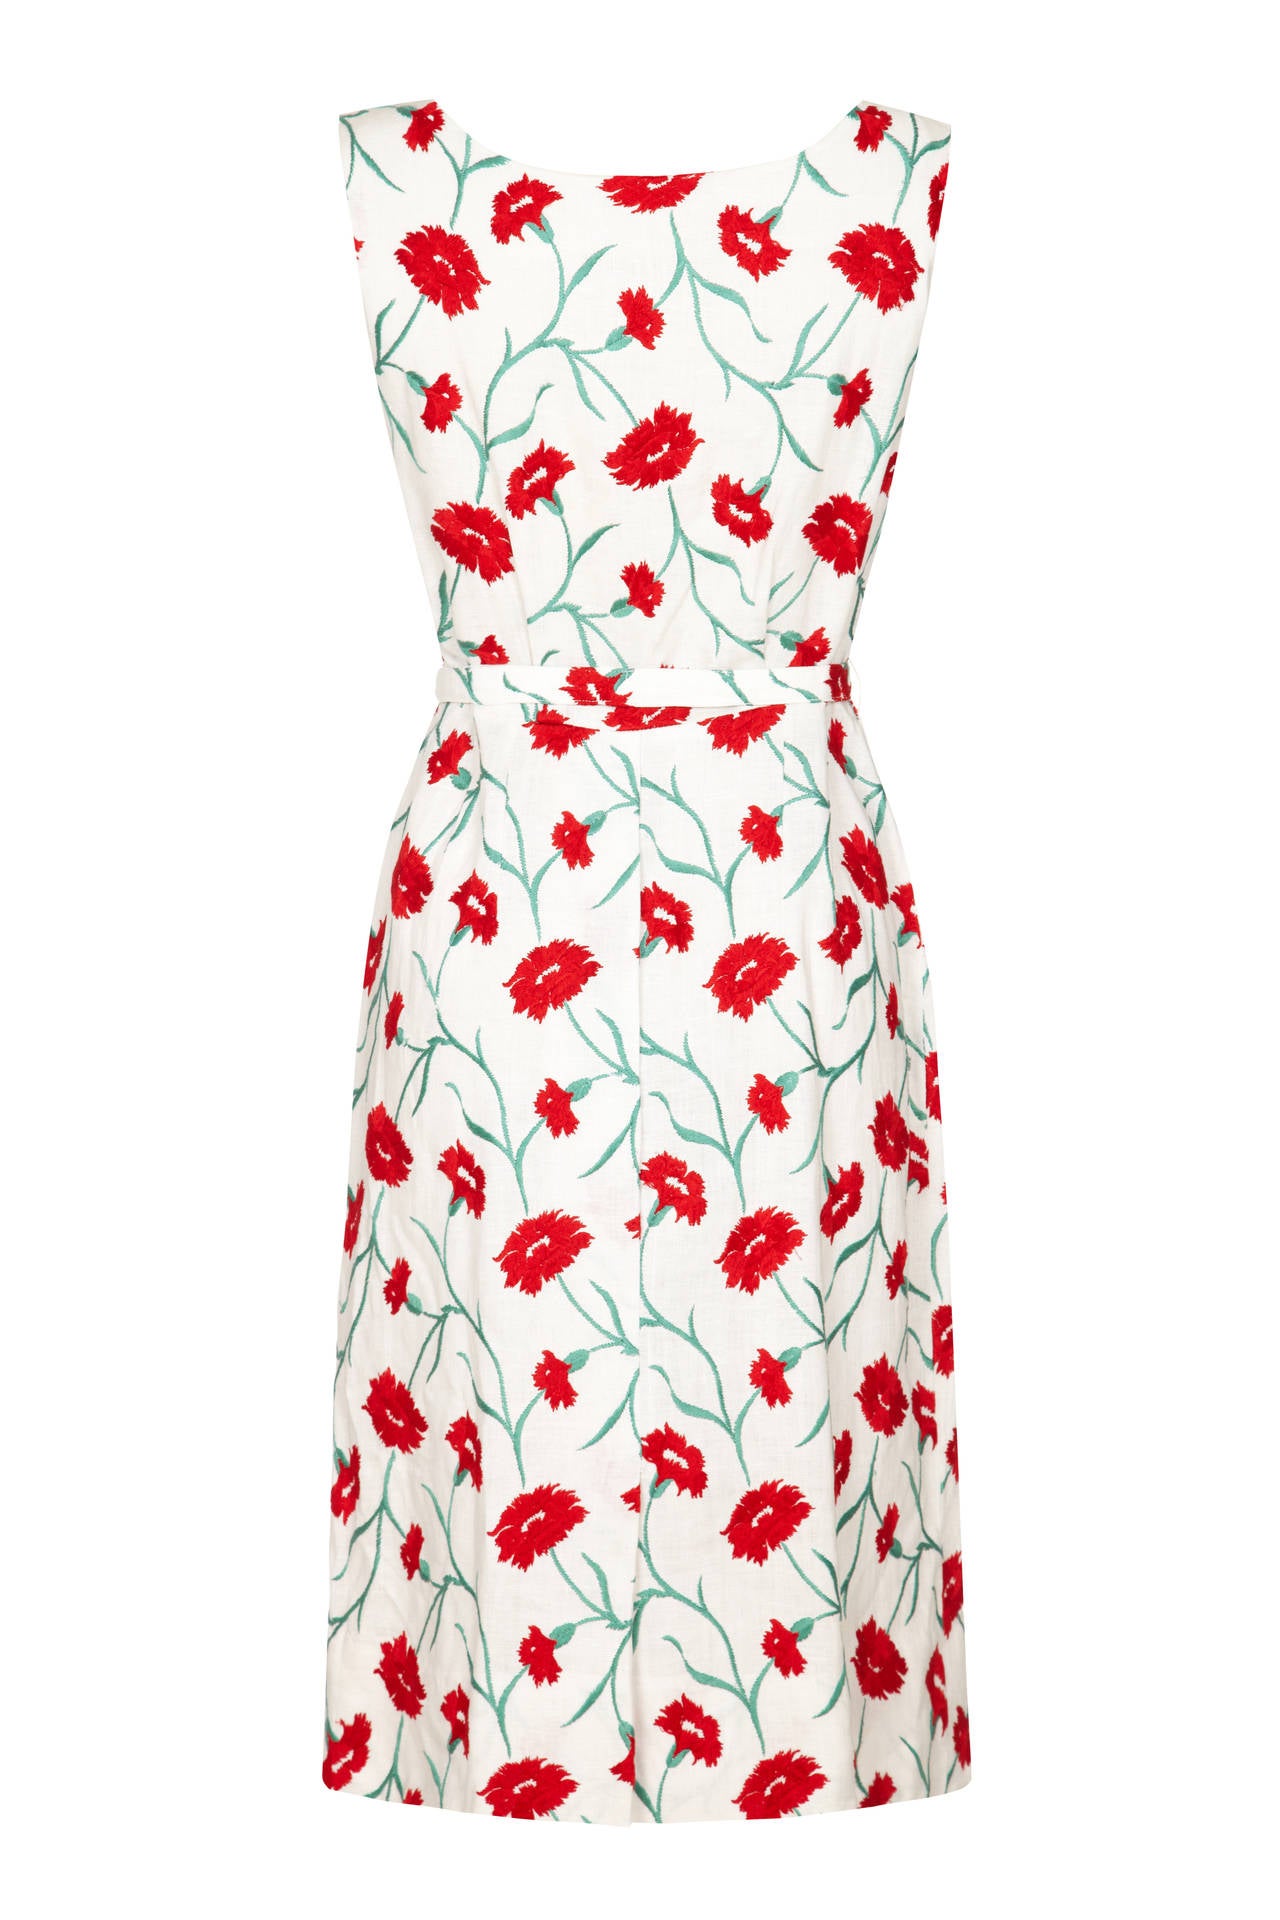 This beautiful 1960s white linen sleeveless shift dress with bold red and green floral embroidery is by Francise Of Nassau and features original matching belt, scoop neckline and tailored bodice with princess seams. The surface patterns skilfully